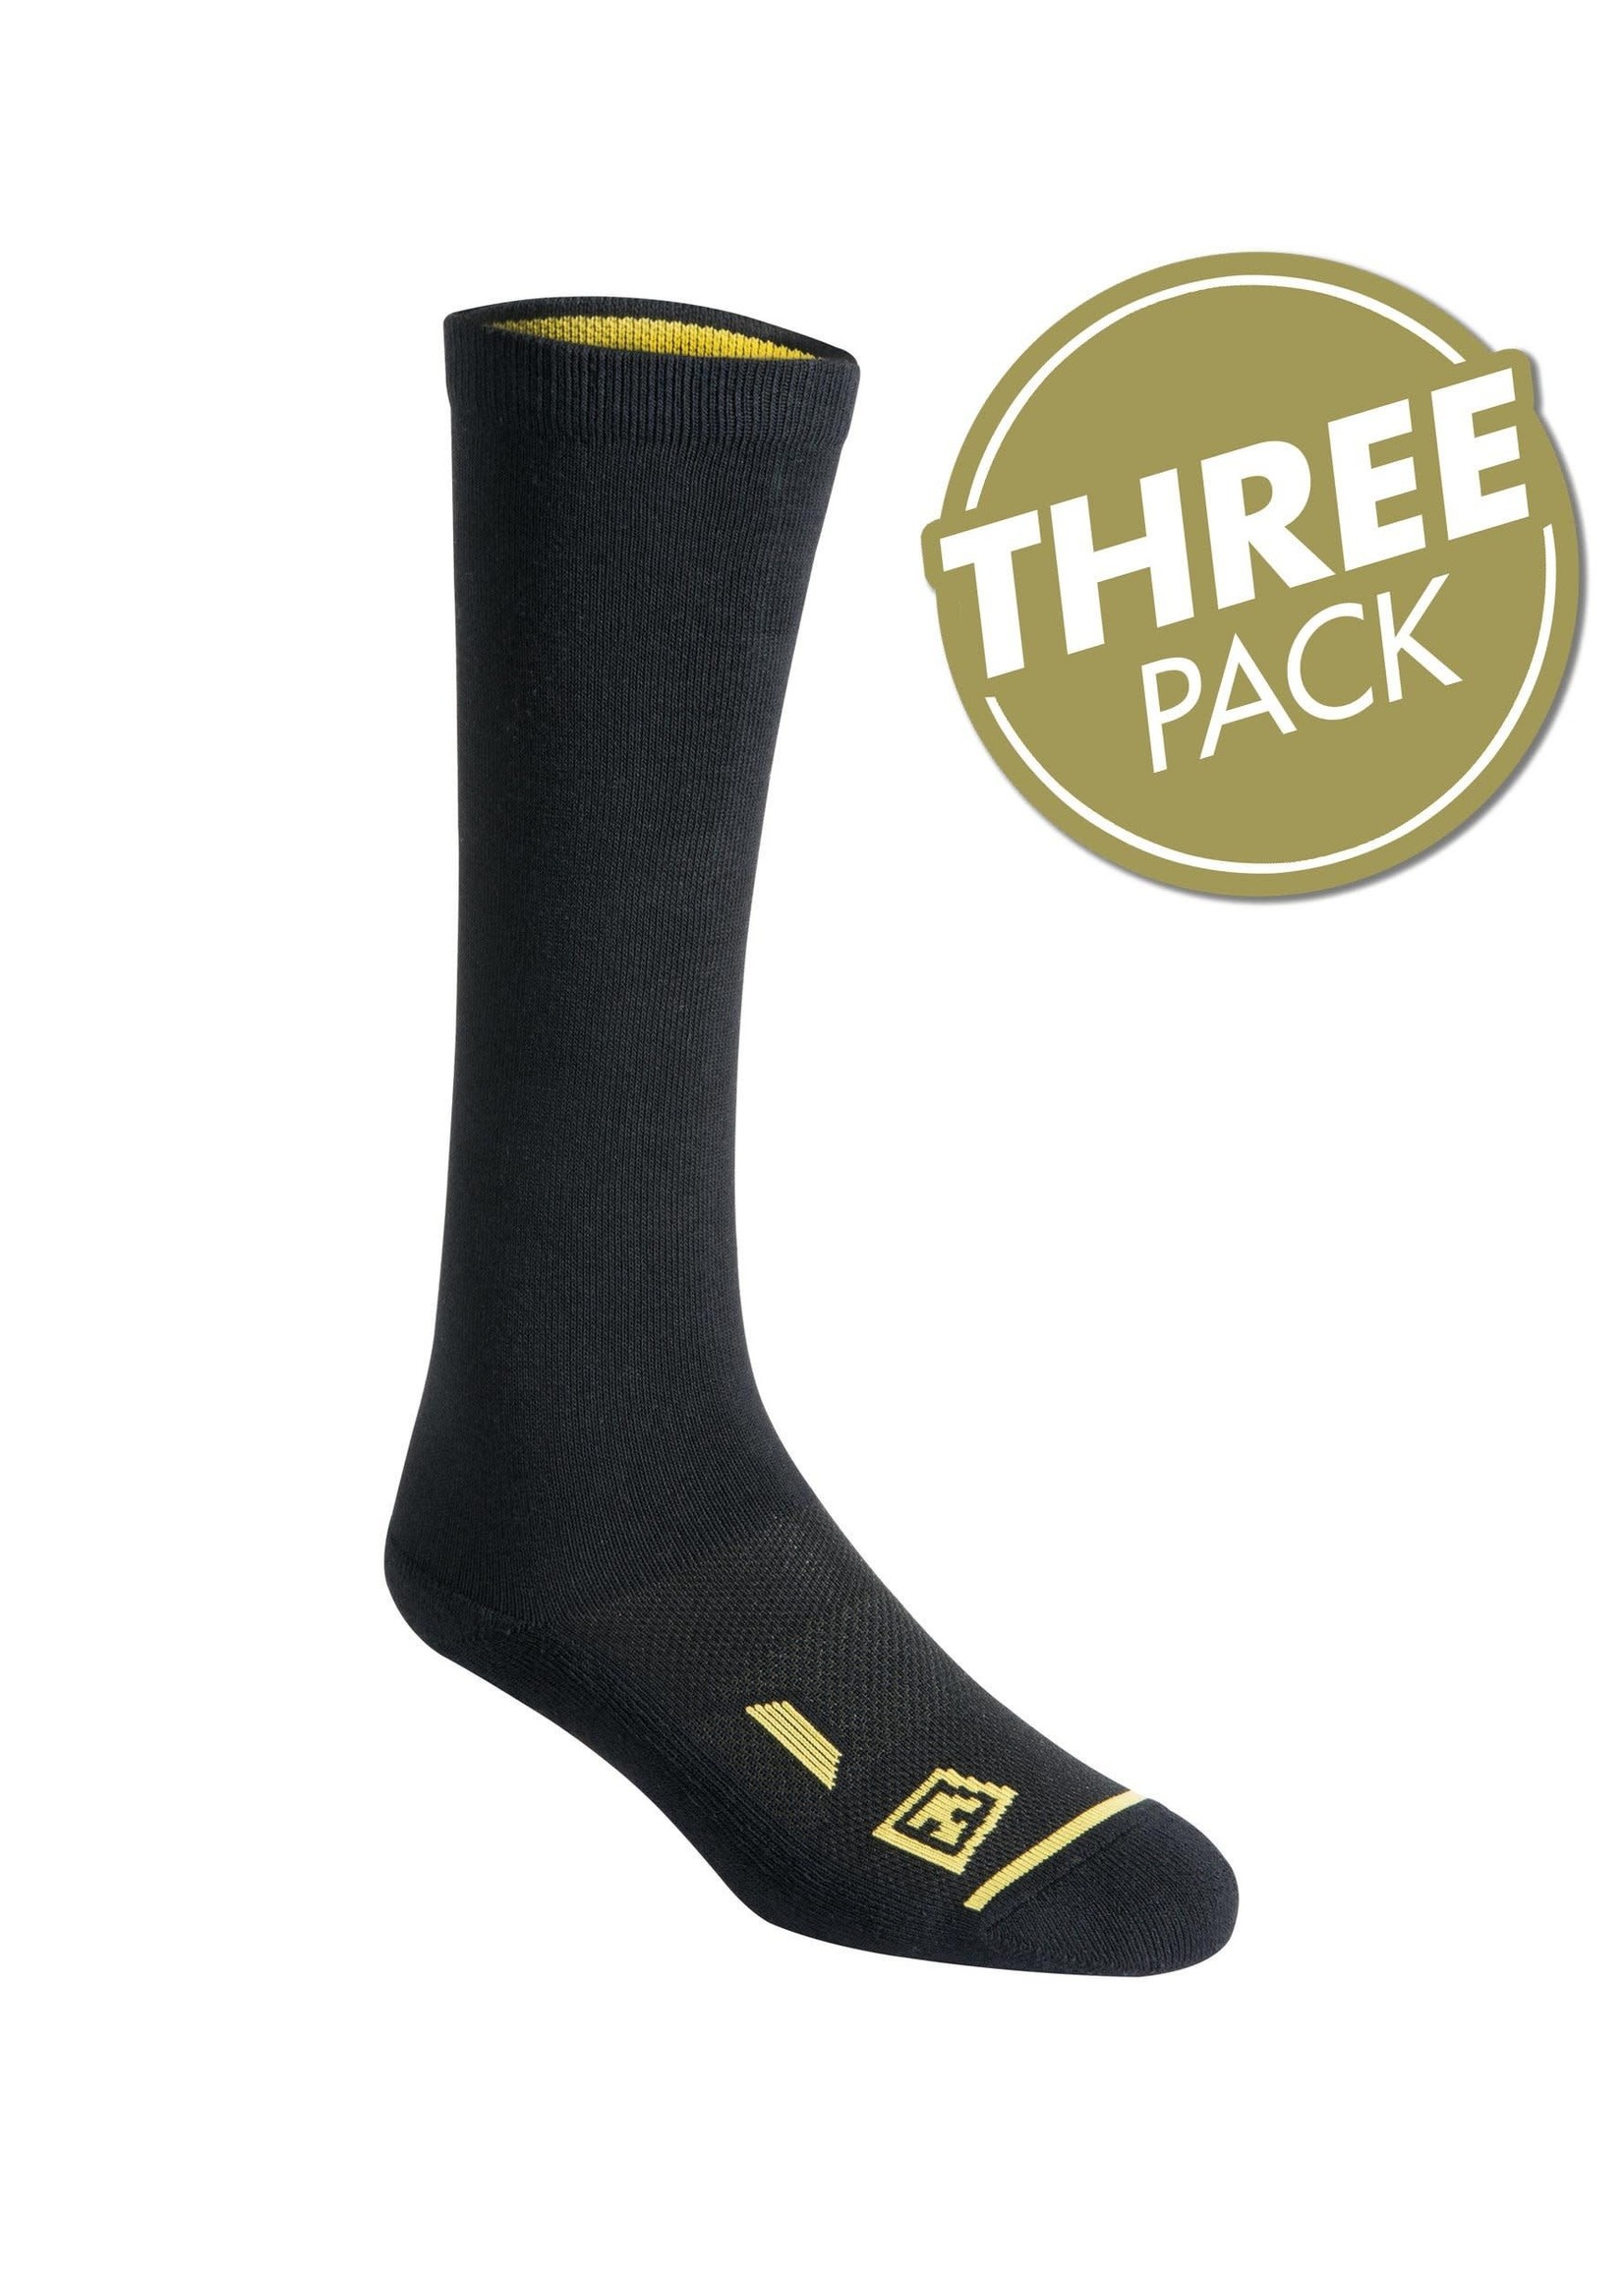 First Tactical First Tactical Cotton Duty Socks Black 3-Pack 9"